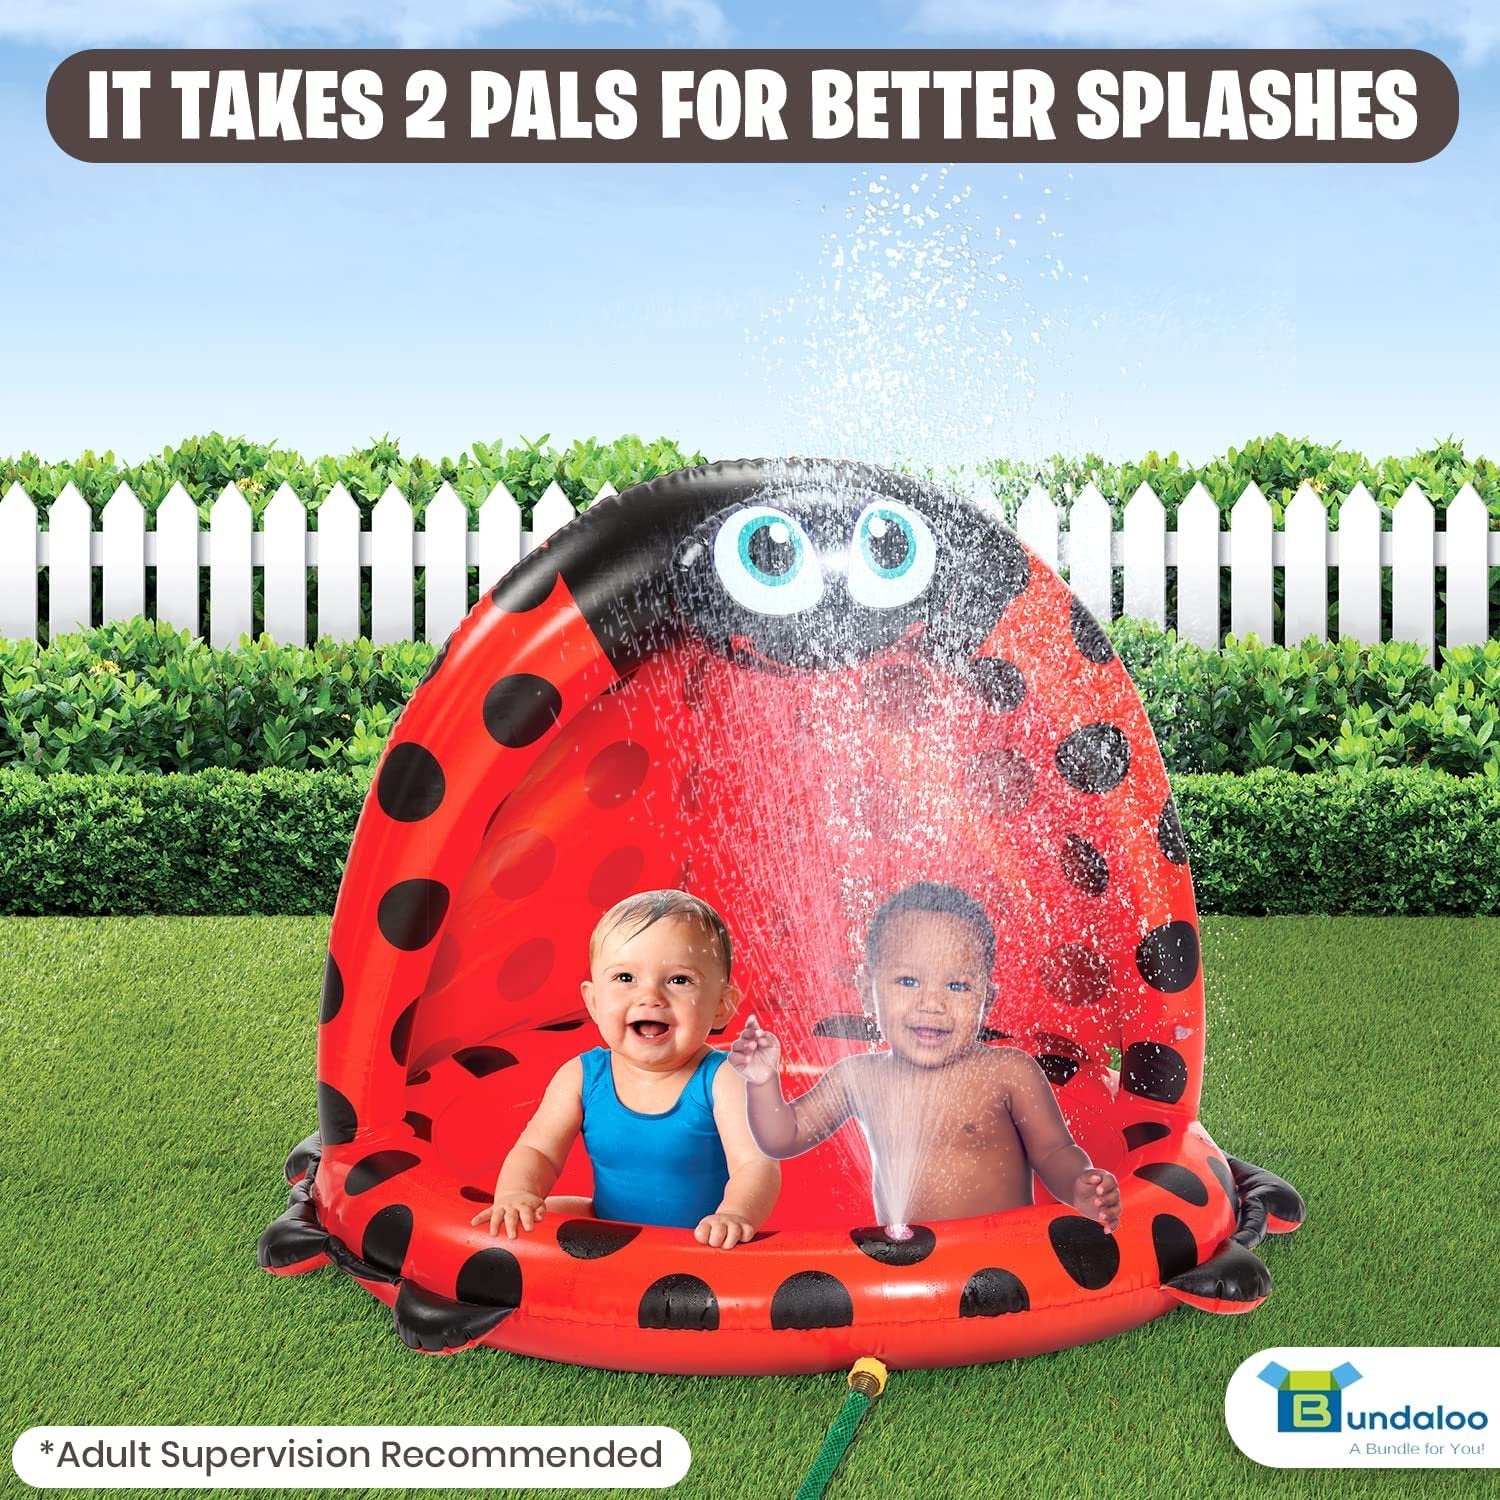 Bundaloo Baby Pool with Canopy and Sprinkler - Inflatable Ladybug Kiddie Pool for Toddler Boys and Girls with Shade - Perfect Toy for Outdoor Summer Fun